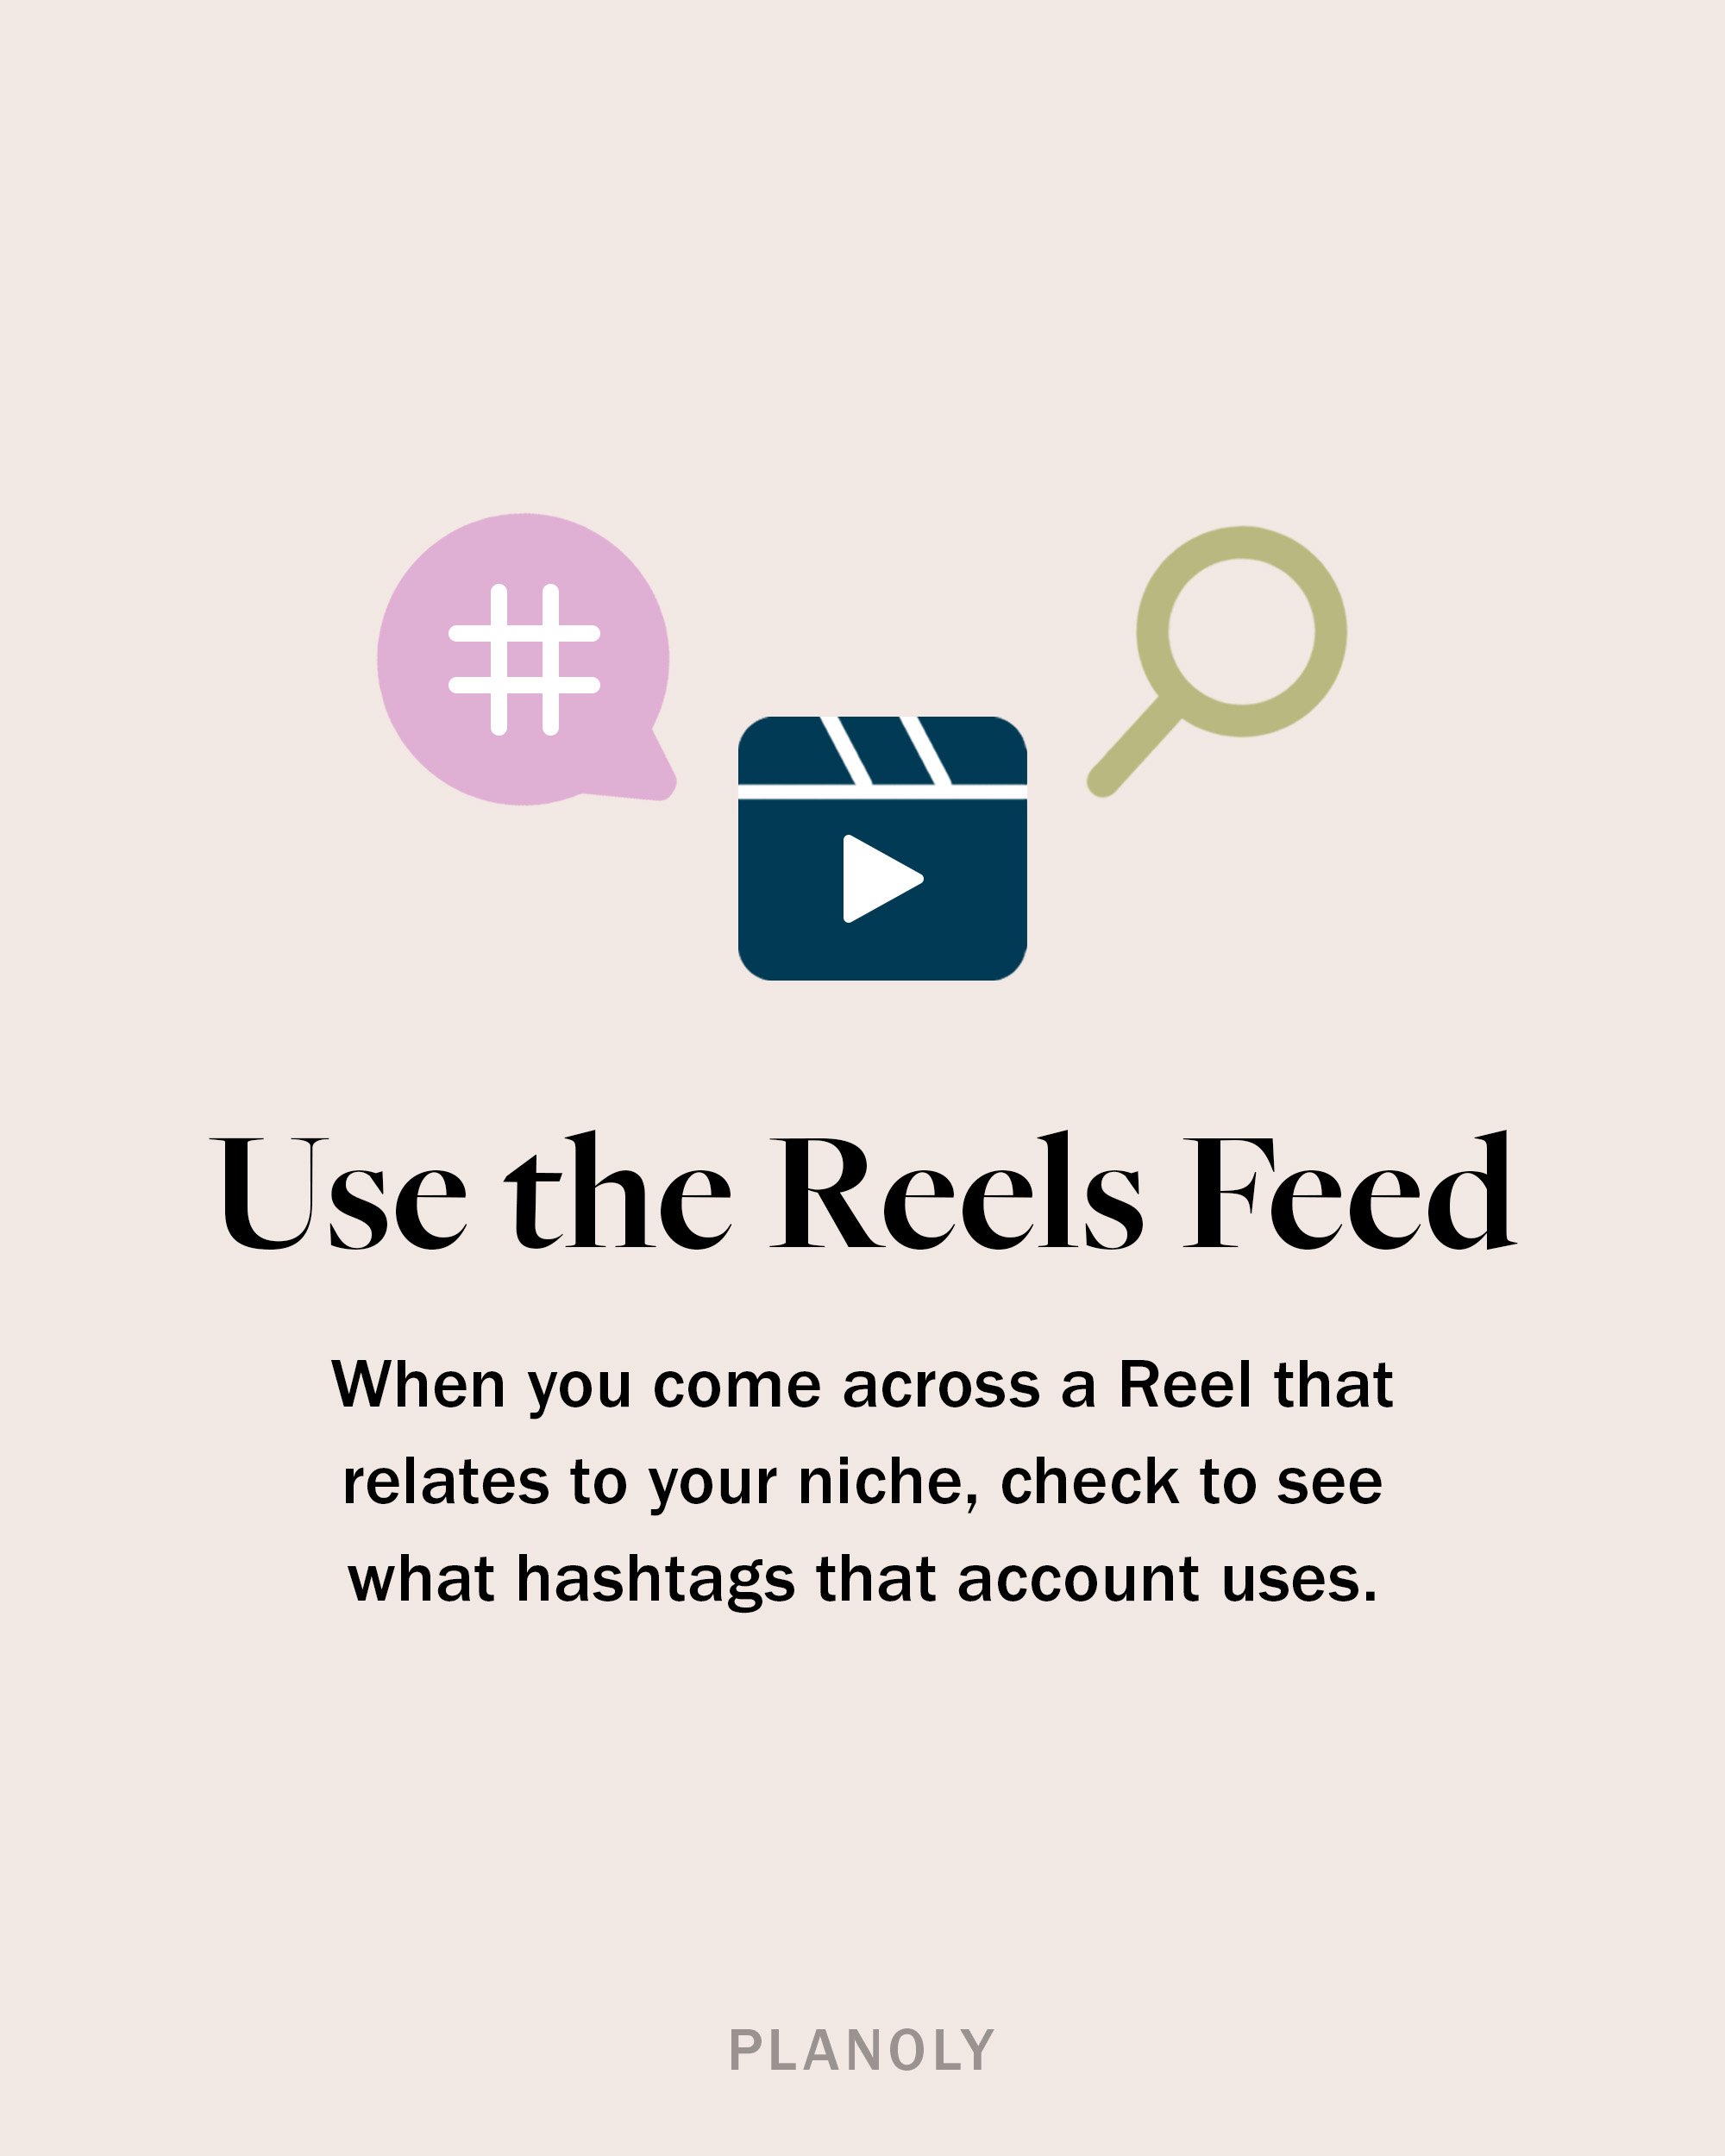 PLANOLY - IG Feed - How to Use Instagram Reels Hashtags for Engagement - 2.jpg